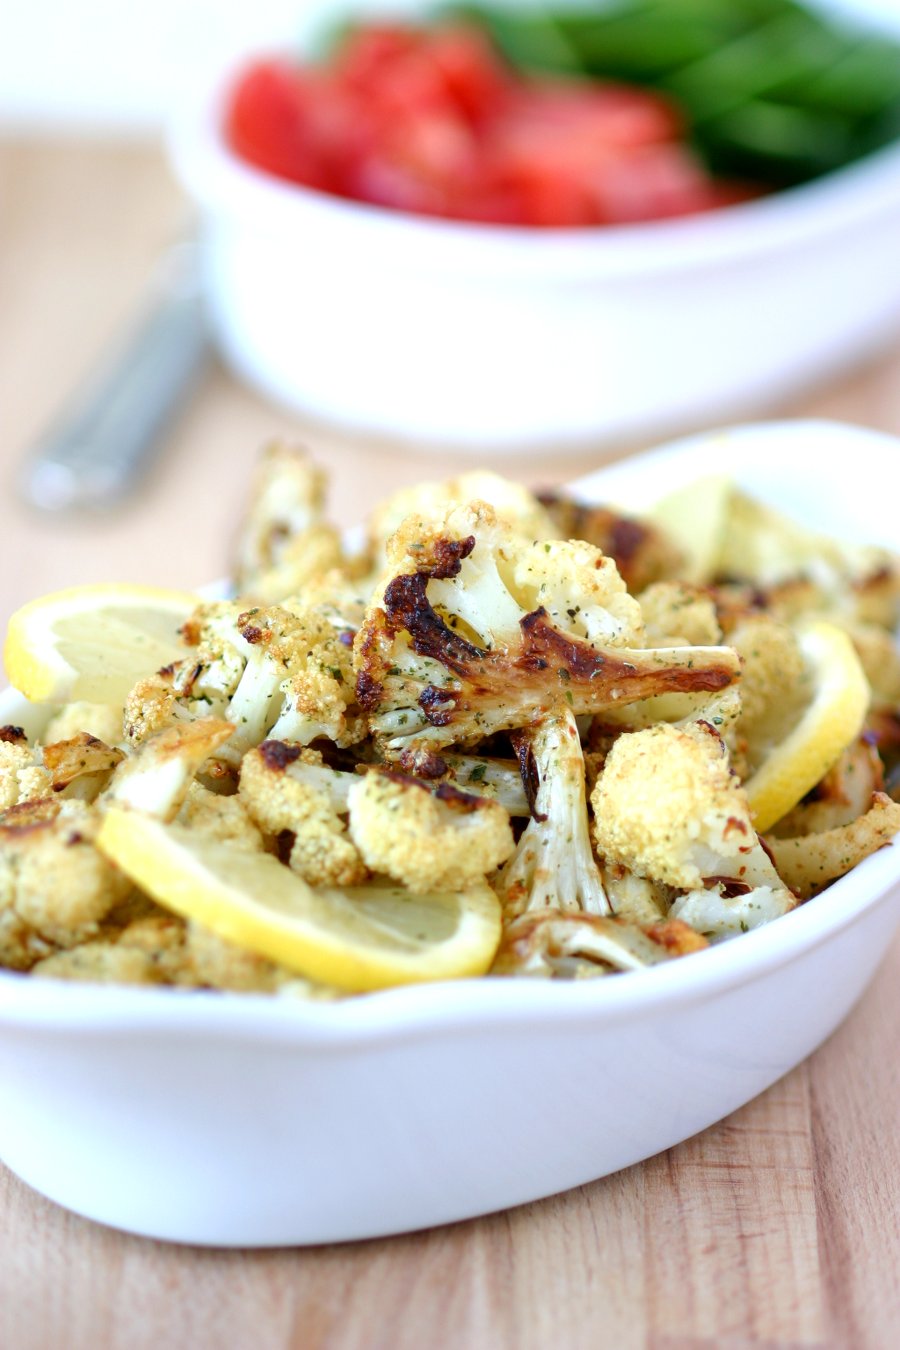 An easy recipe for Roasted Spiced Cauliflower with cumin, pepper, and mint and finished with a squeeze of lemon. Use as a side or stuff into sandwiches.